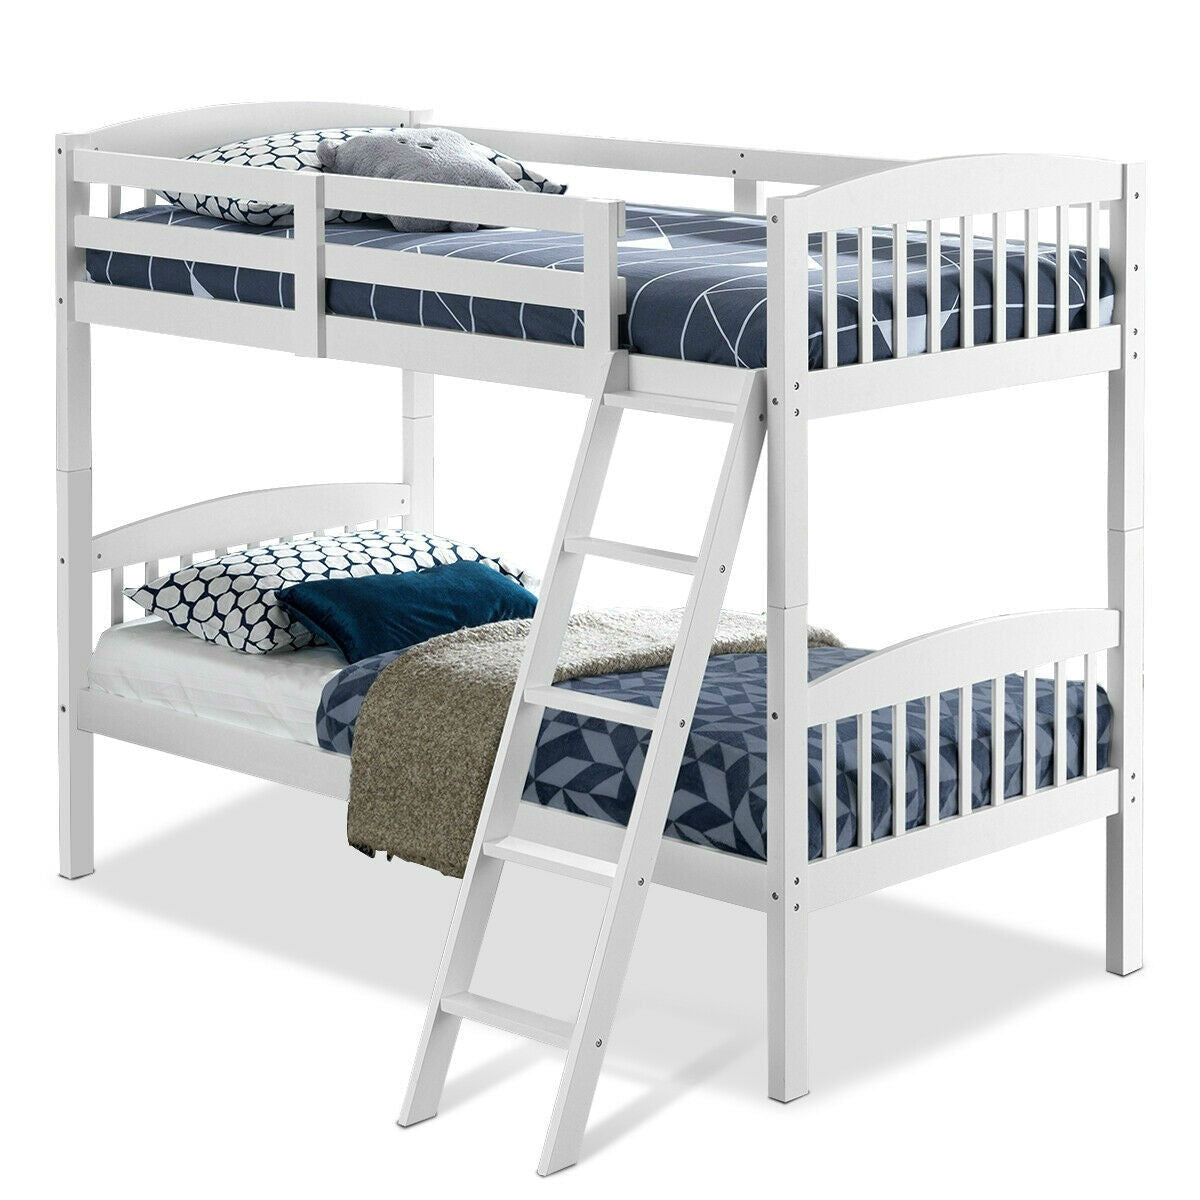 Bedroom > Bed Frames > Bunk Beds - Twin Over Twin Wooden Bunk Bed With Ladder In White Wood Finish